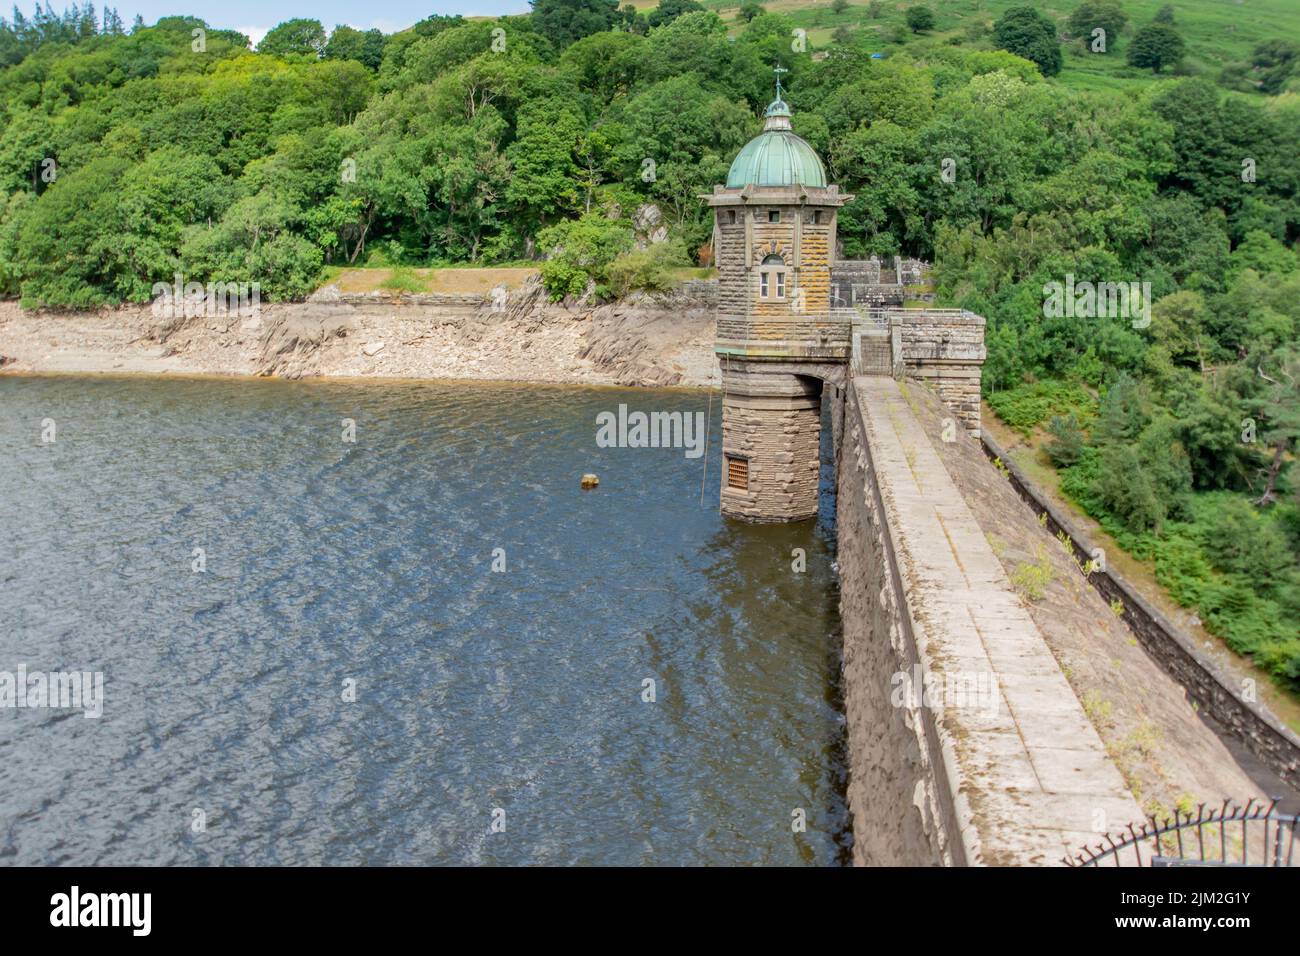 These are the water levels after a dry summer so far in the uk. this is the Elan Valley in Mid-Wales. Stock Photo